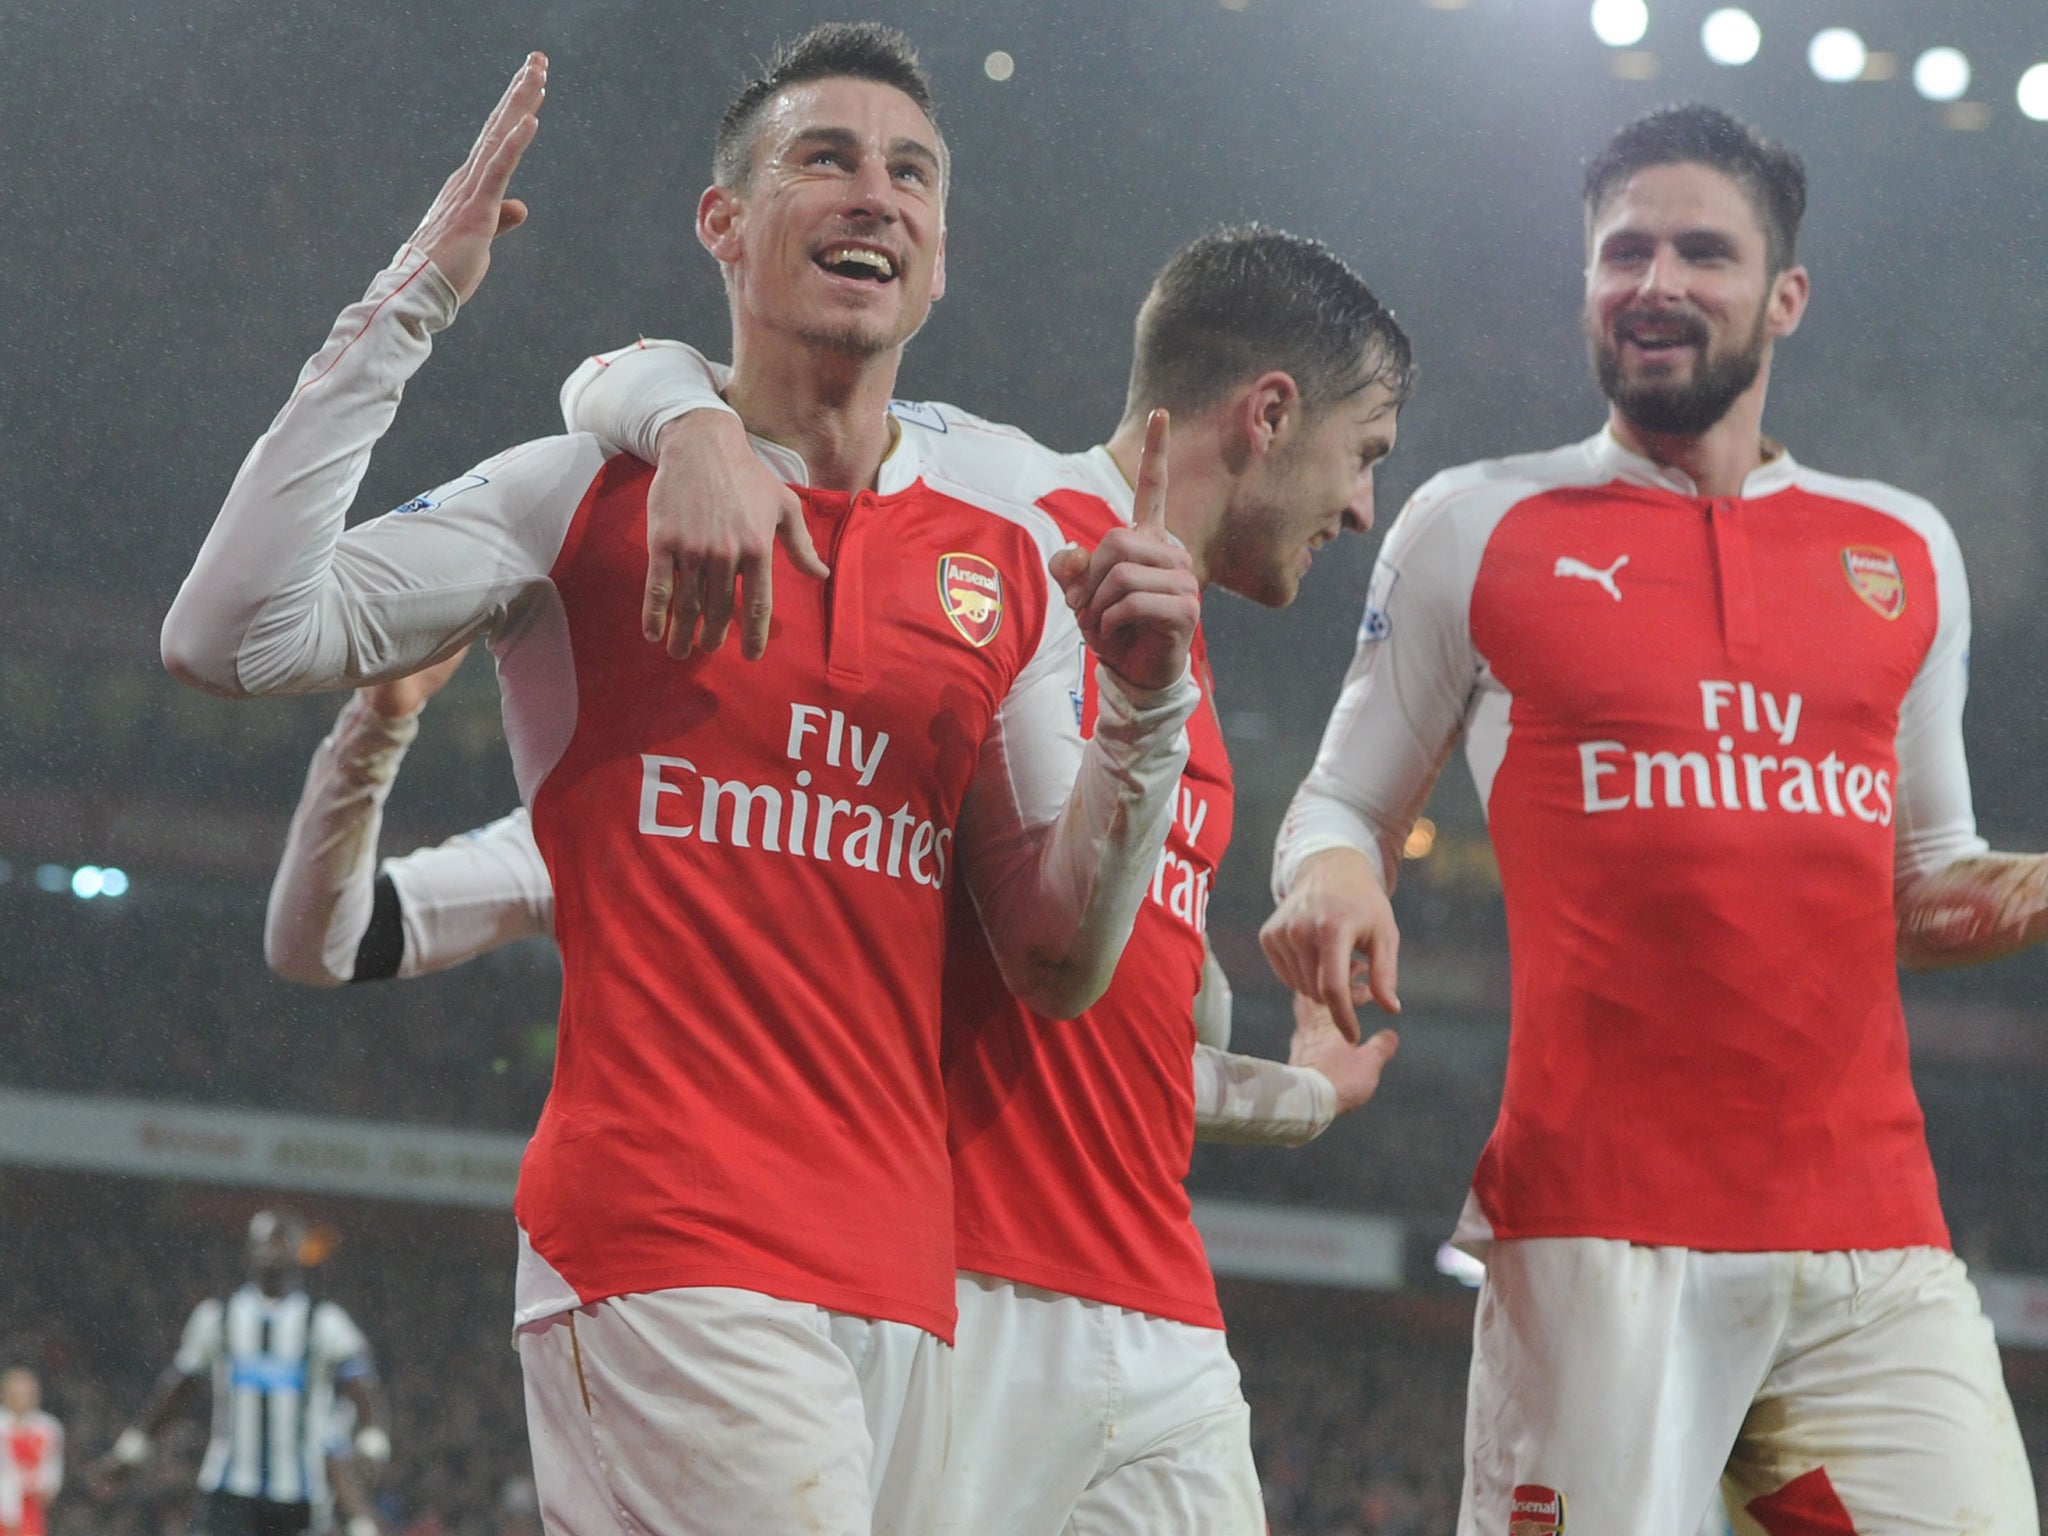 &#13;
Laurent Koscielny scored the only goal of the game against Newcastle United&#13;